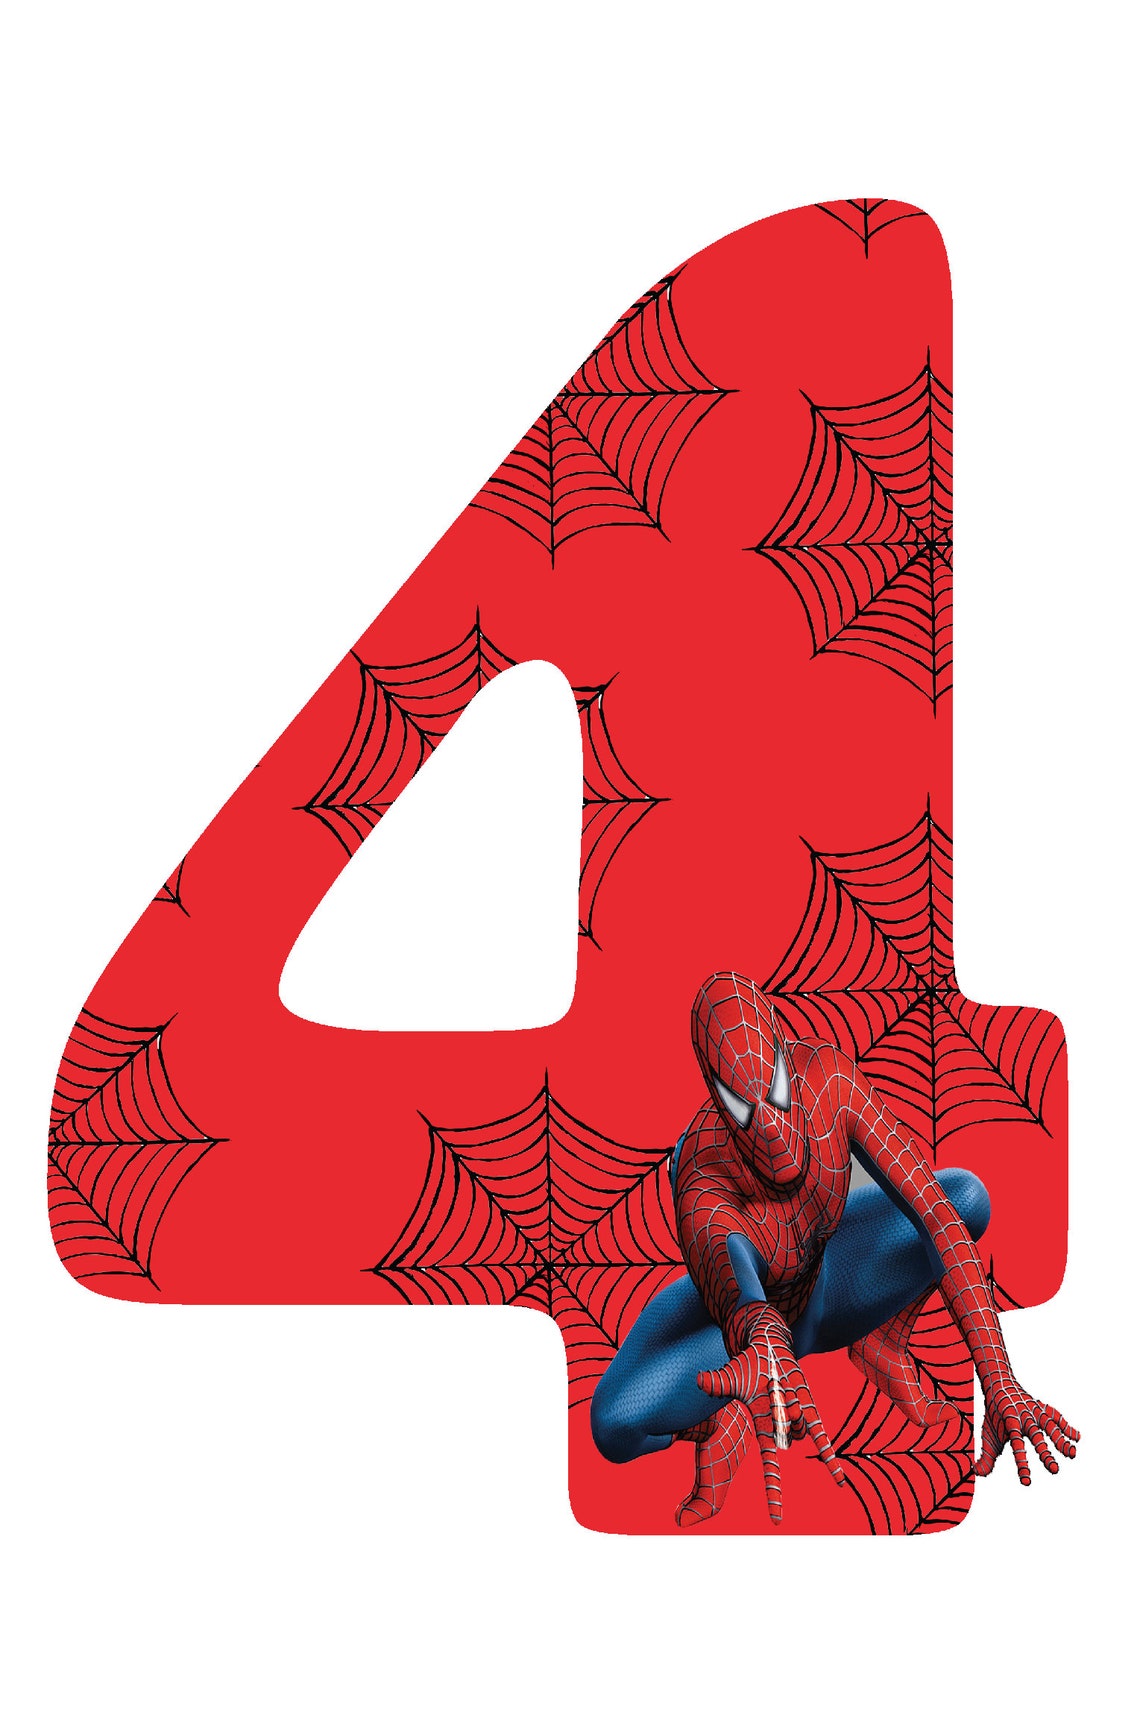 spiderman-alphabet-uppercase-and-lowercase-letters-numbers-etsy